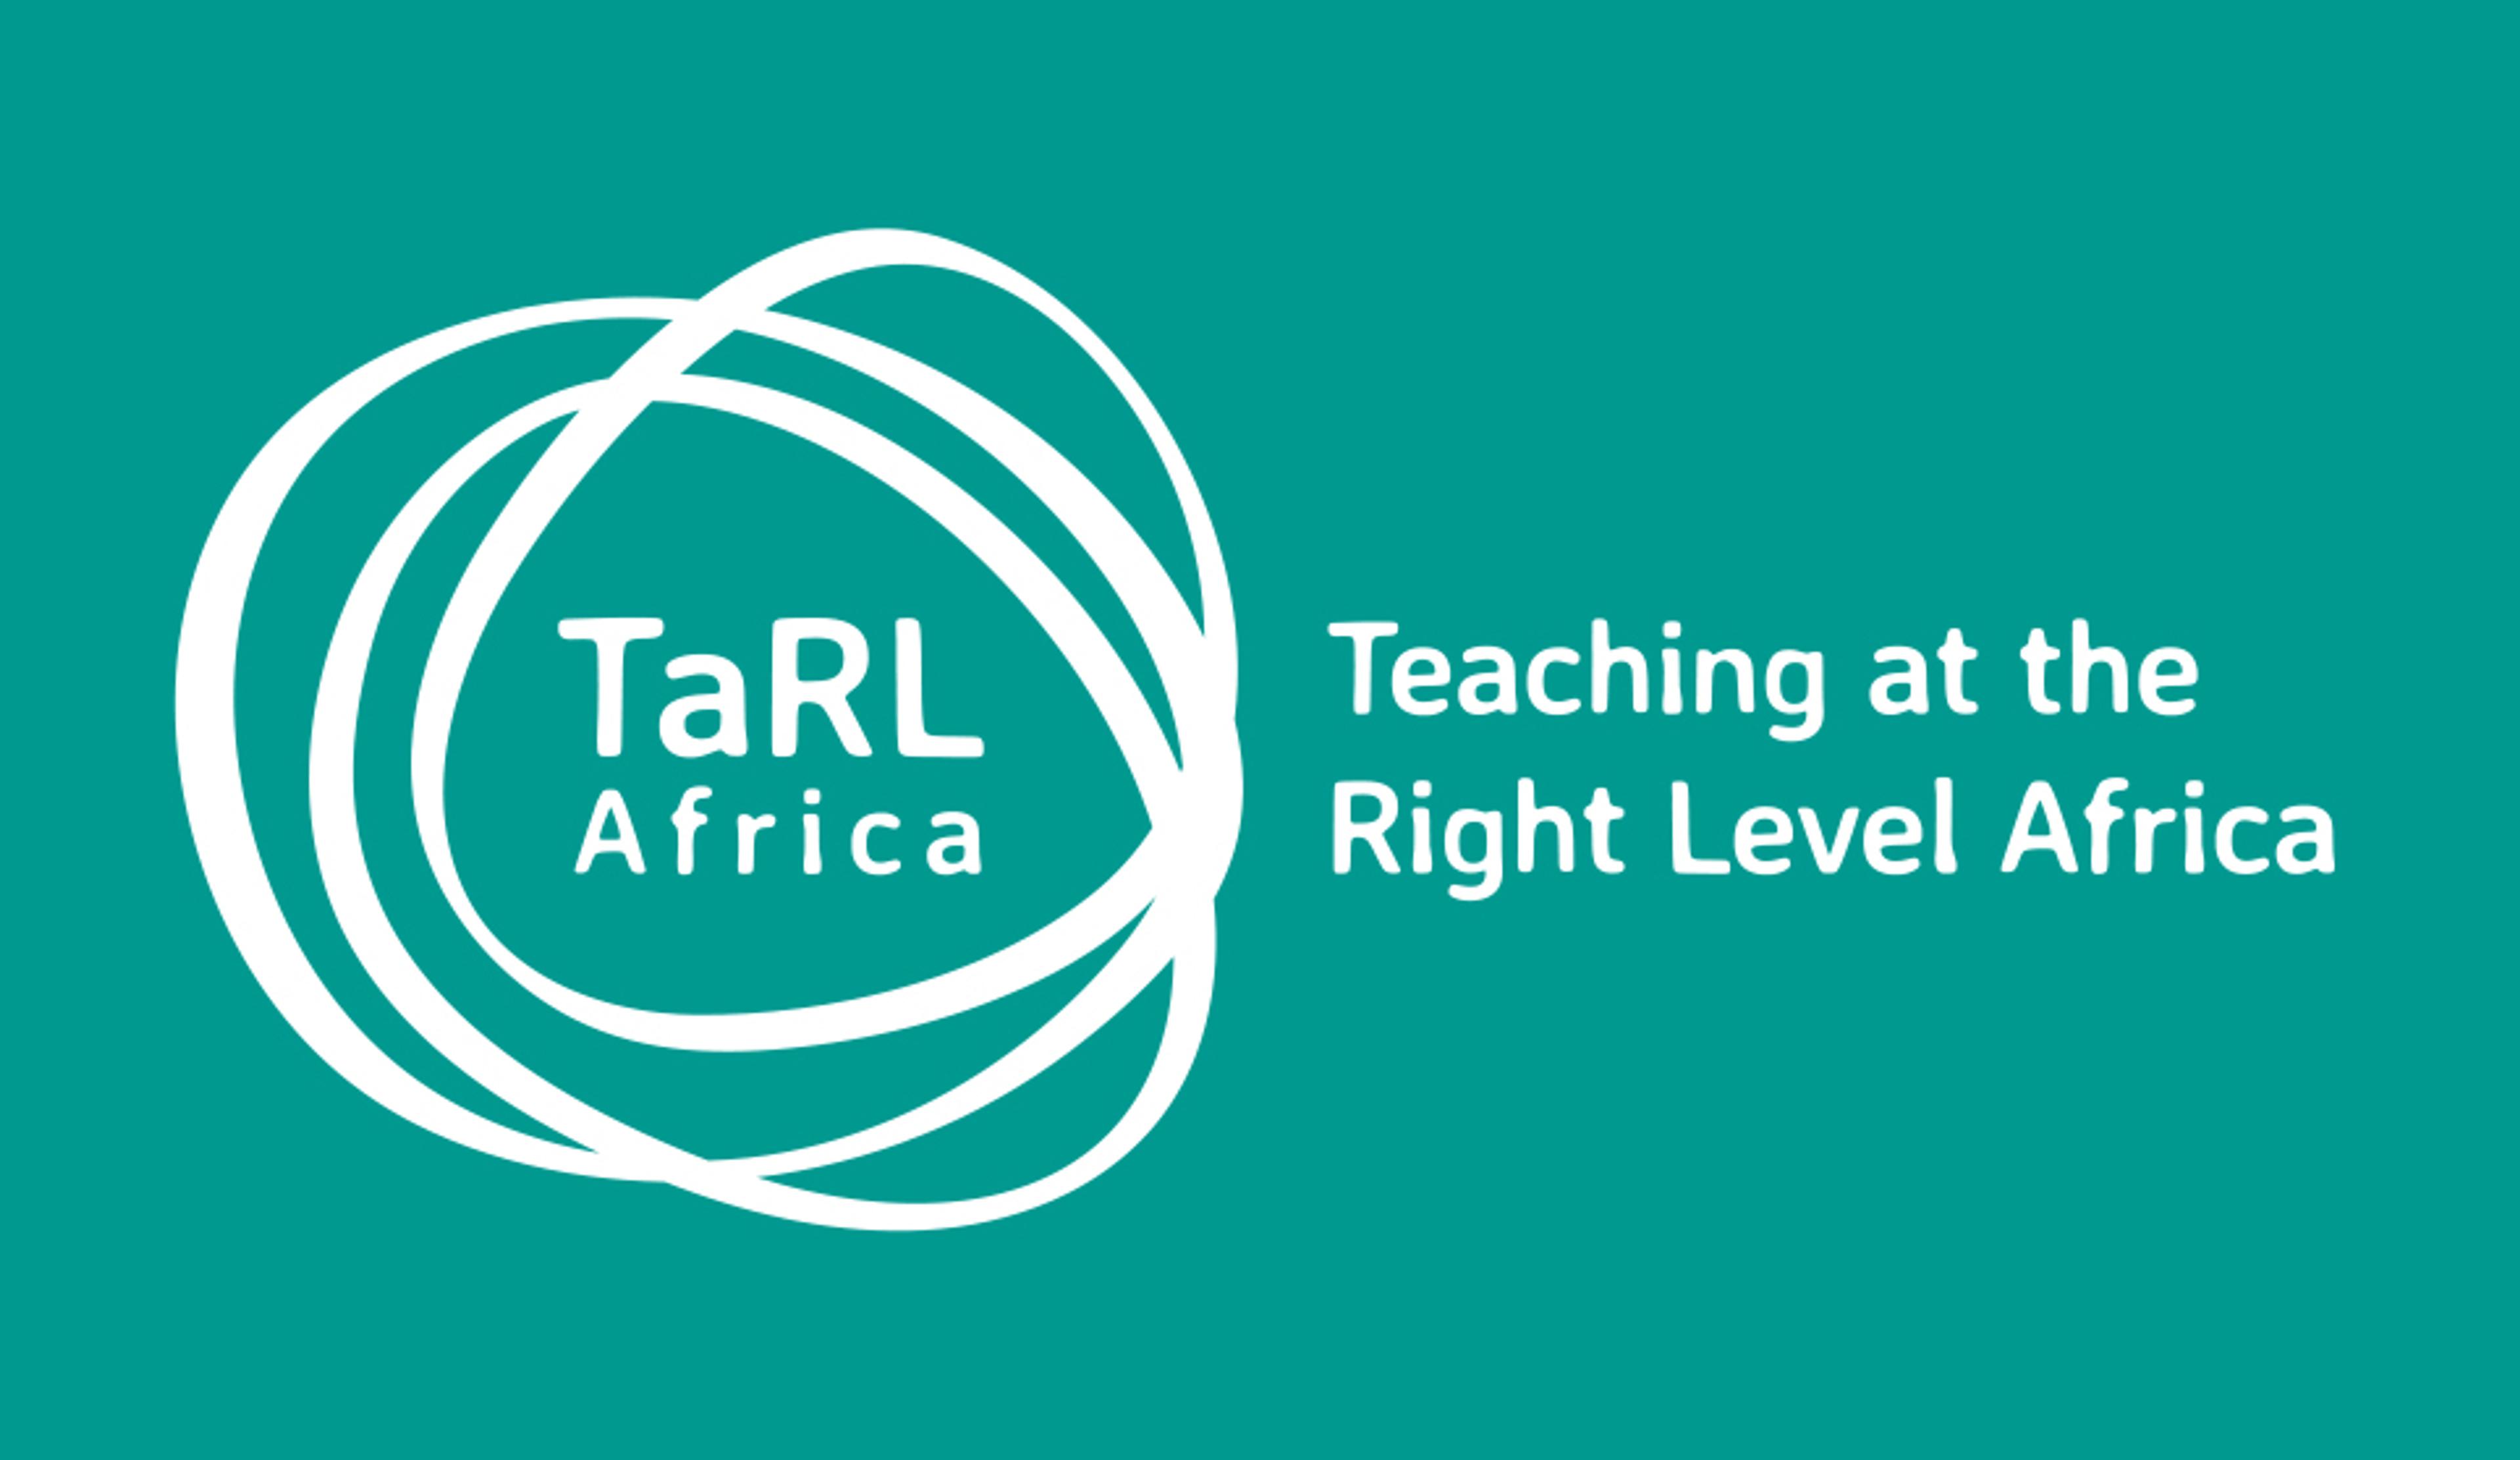 Teaching at the Right Level Africa